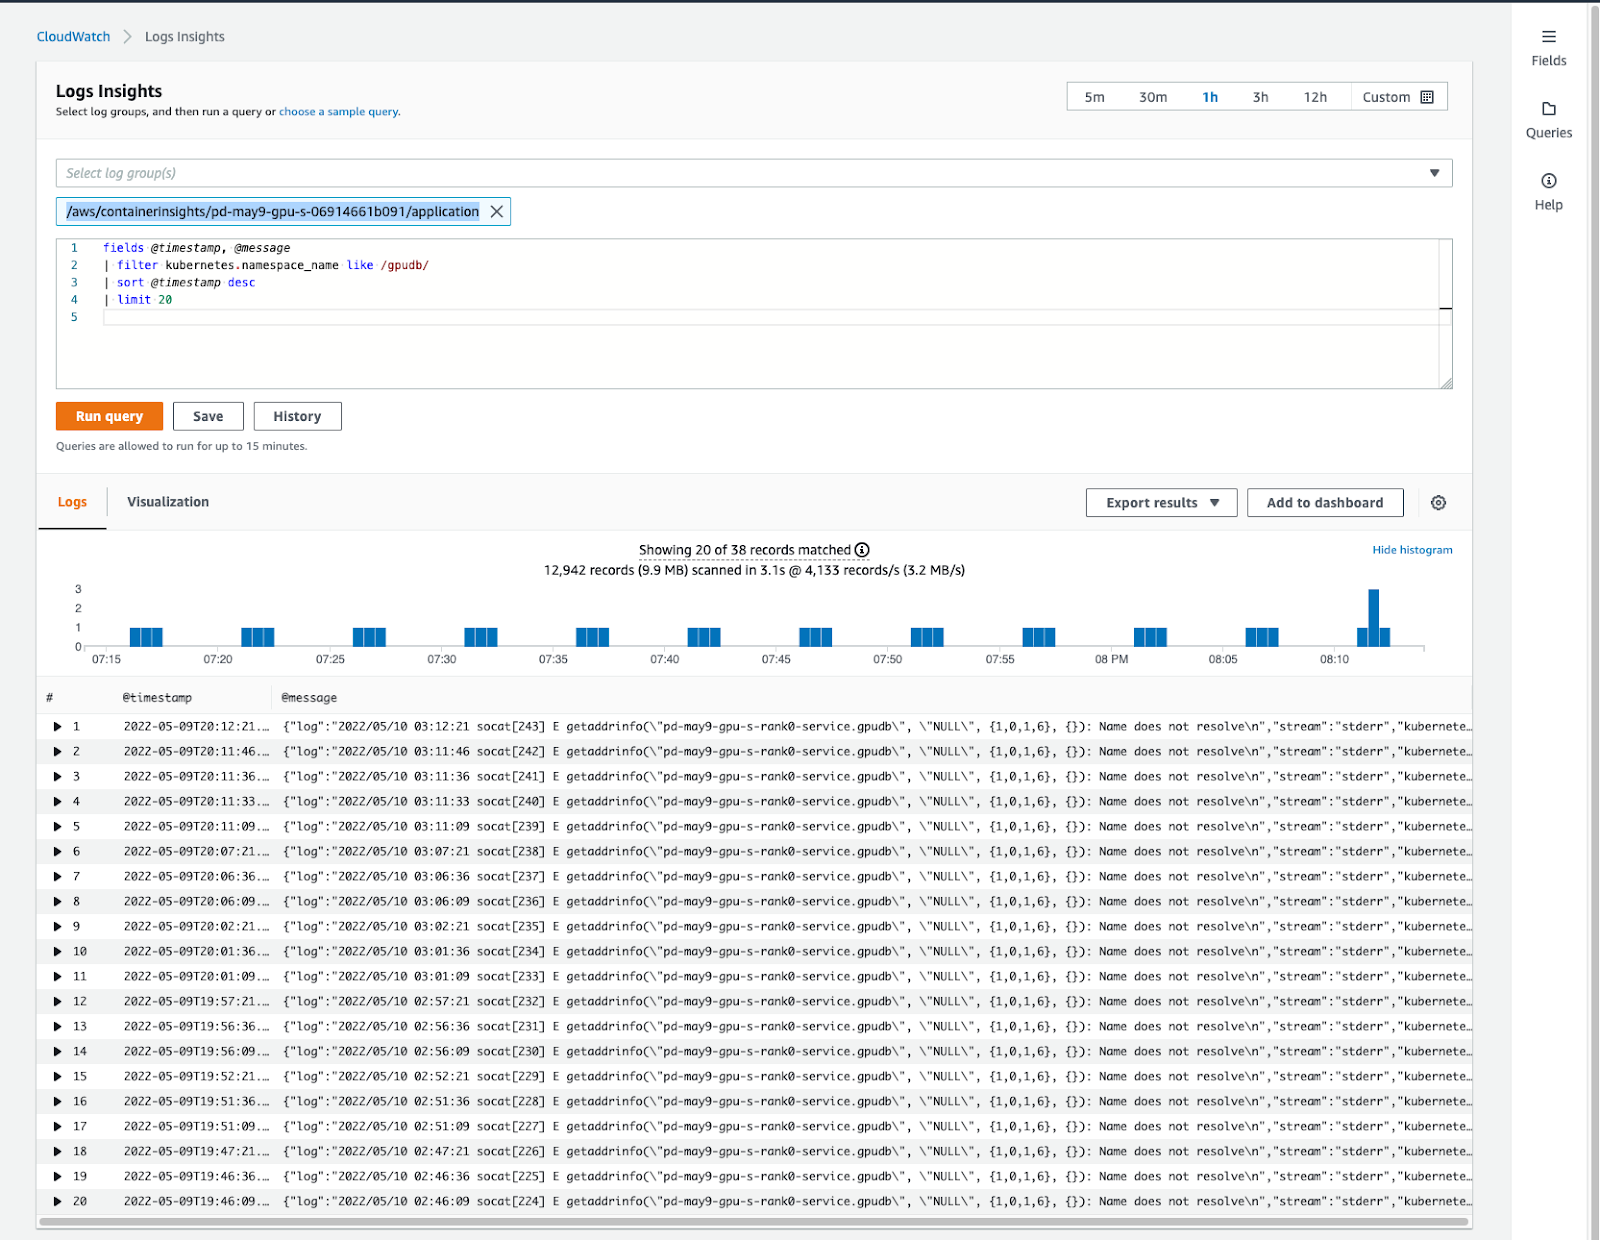 ../images/aws_logs_insights.png